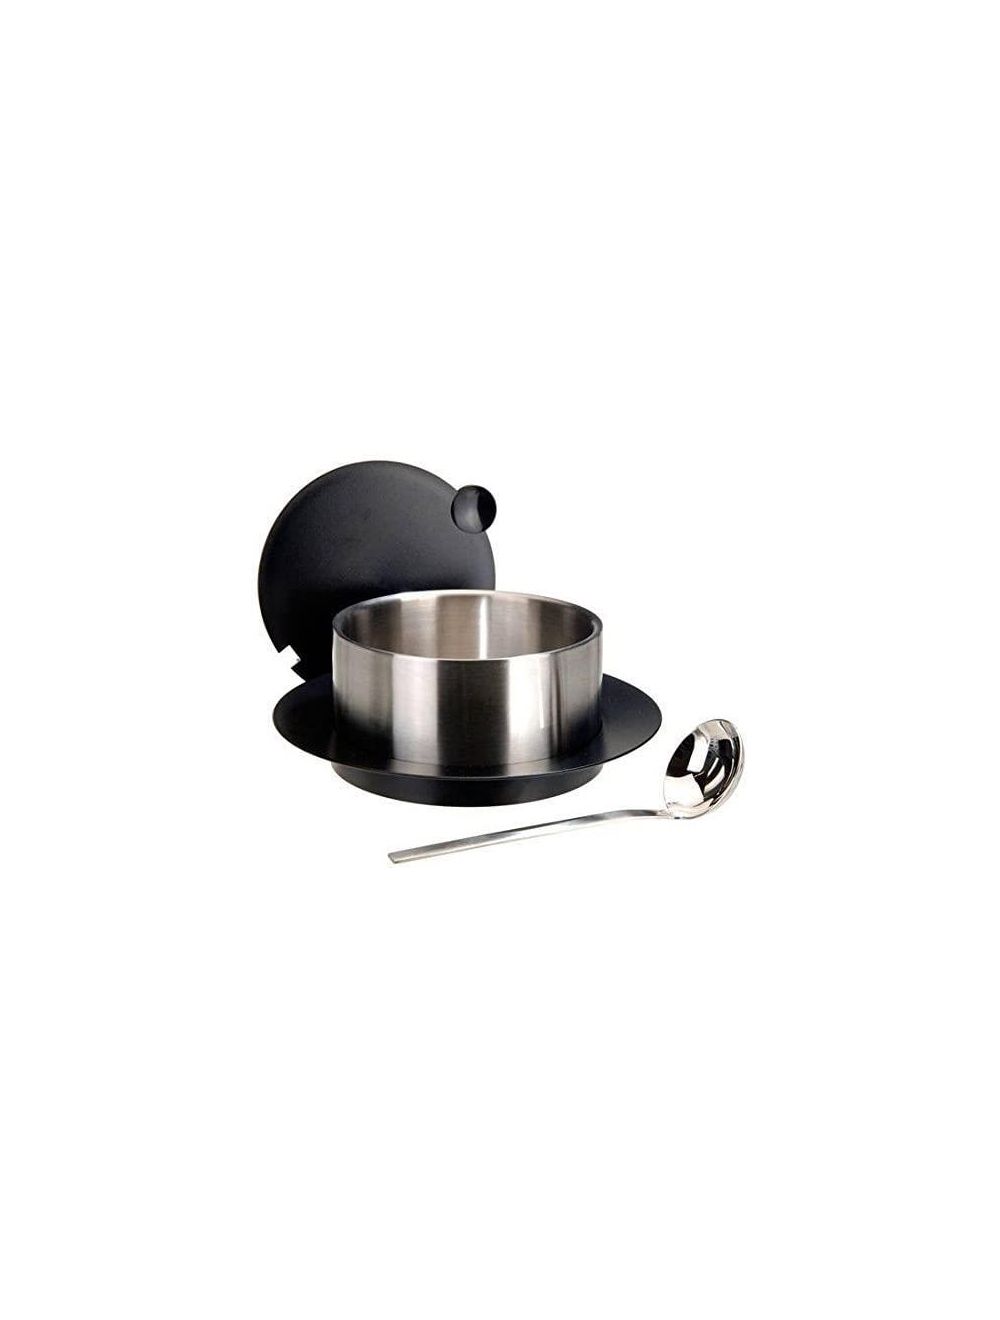 Unibos Stainless Steel Insulated Soup Tureen Serving Dish with Ladle Lid and Plate 2.4L 